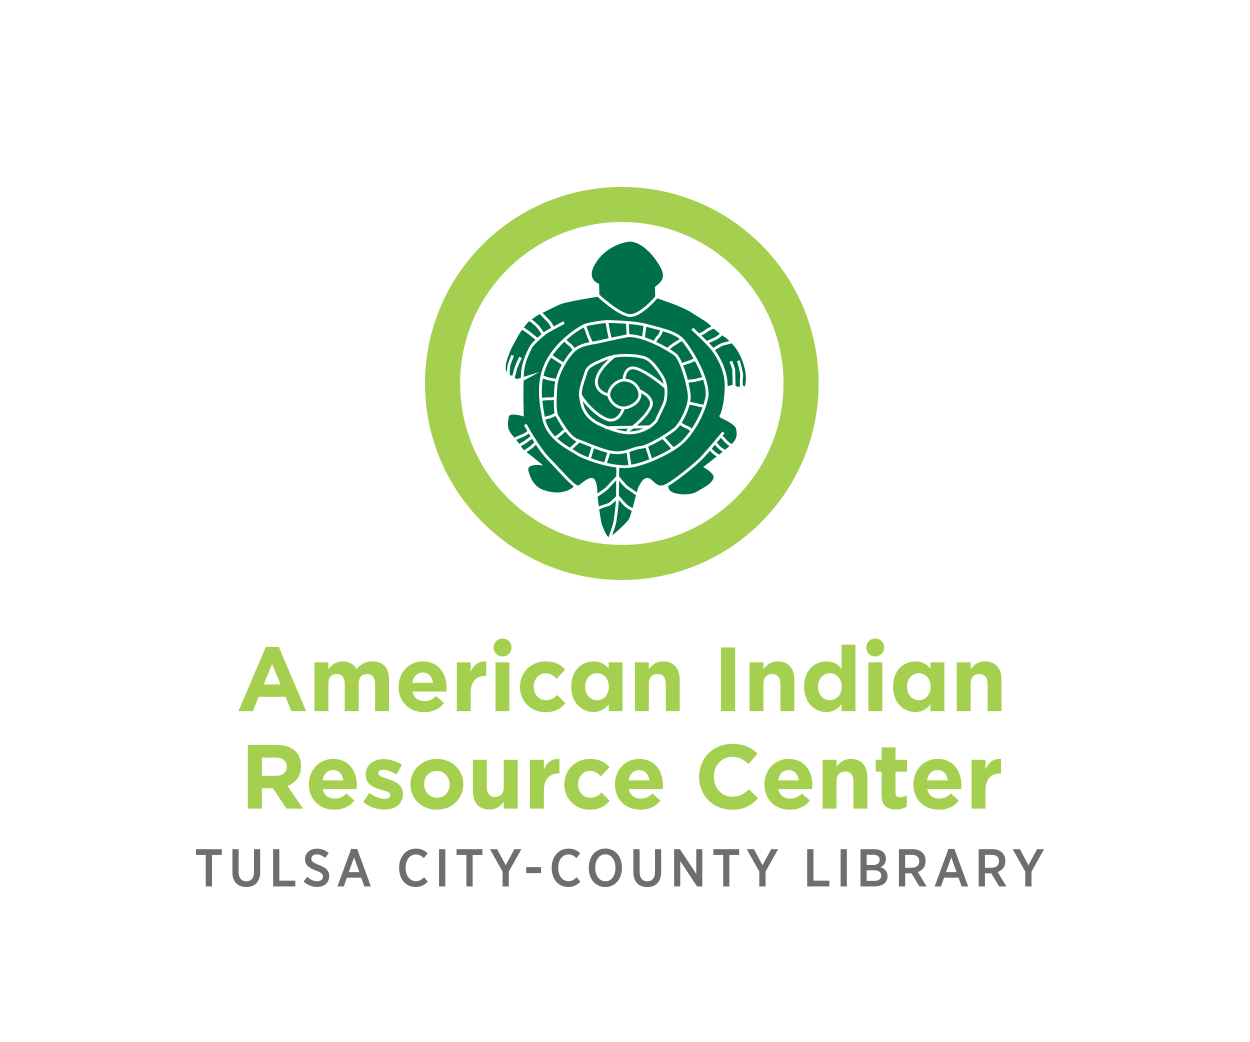 American Indian Resource Center